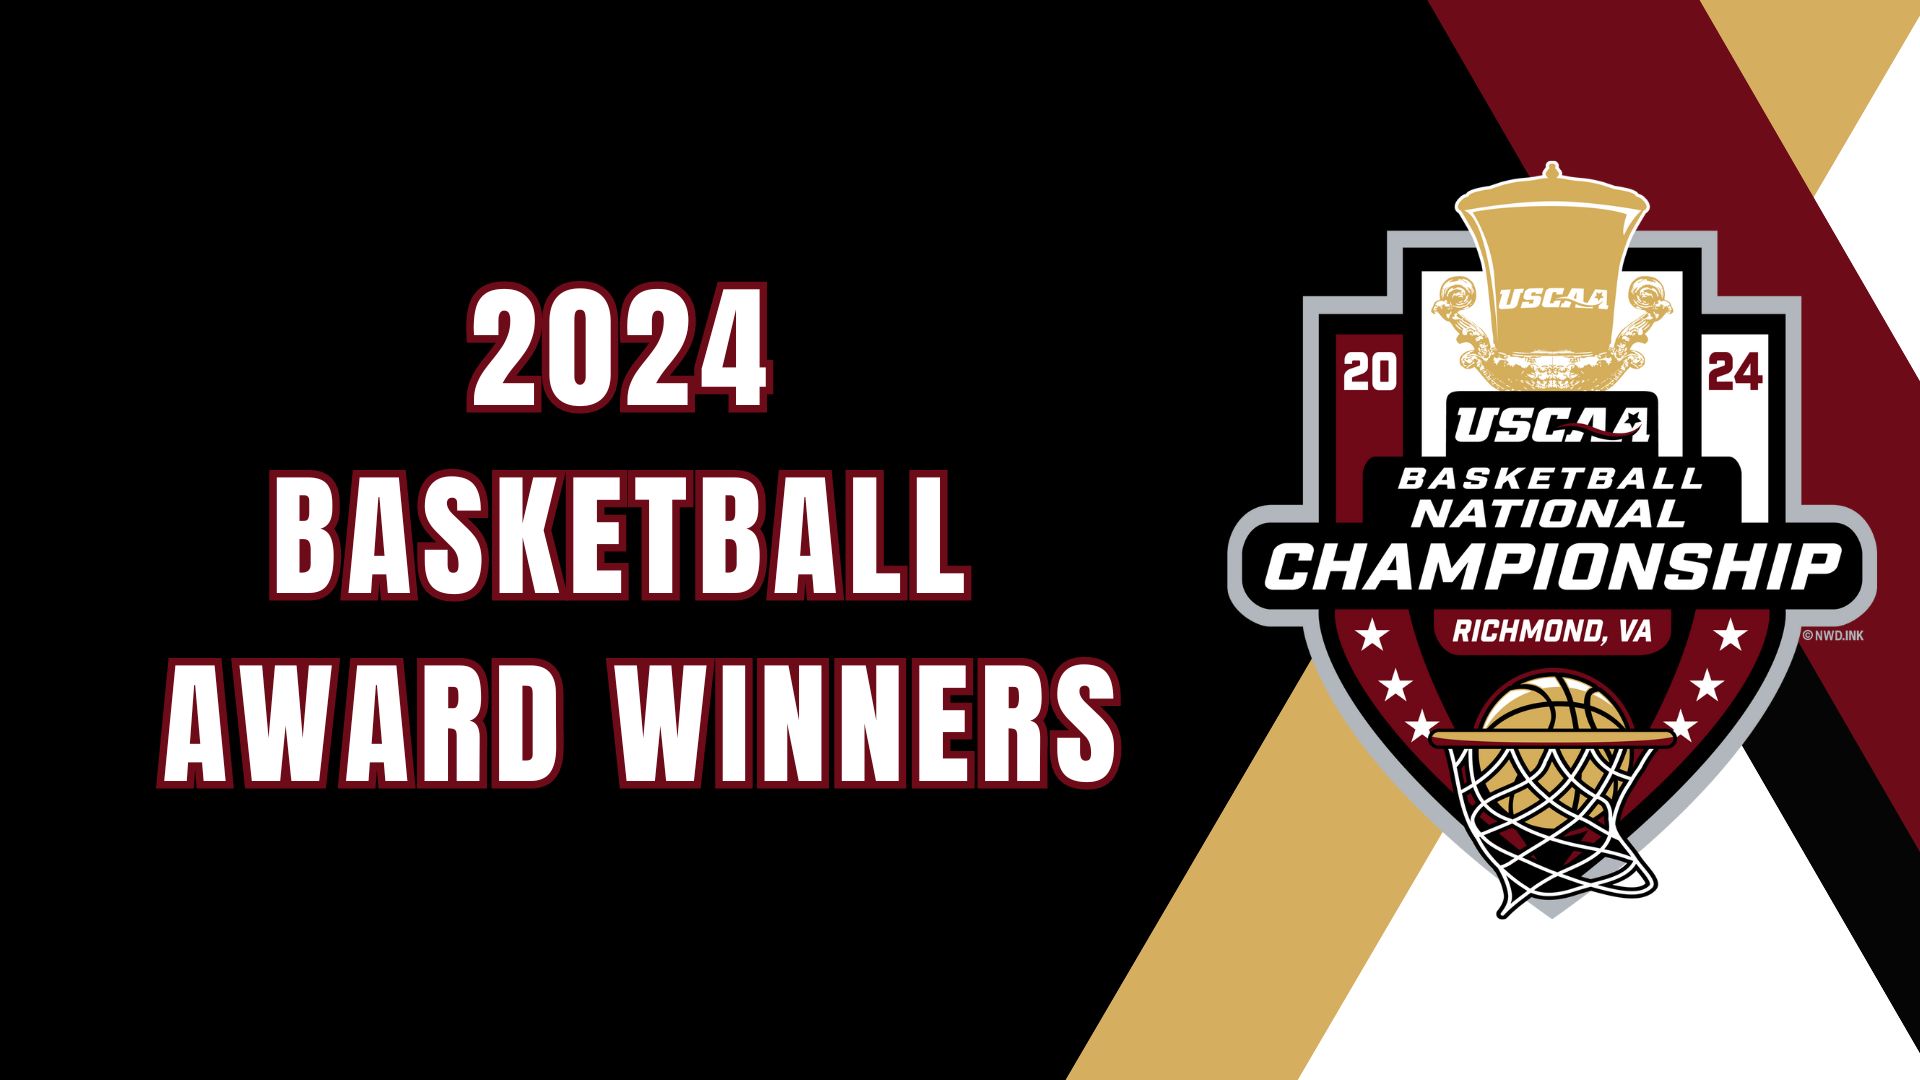 USCAA Announces the 2024 Basketball End of Year Award Winners